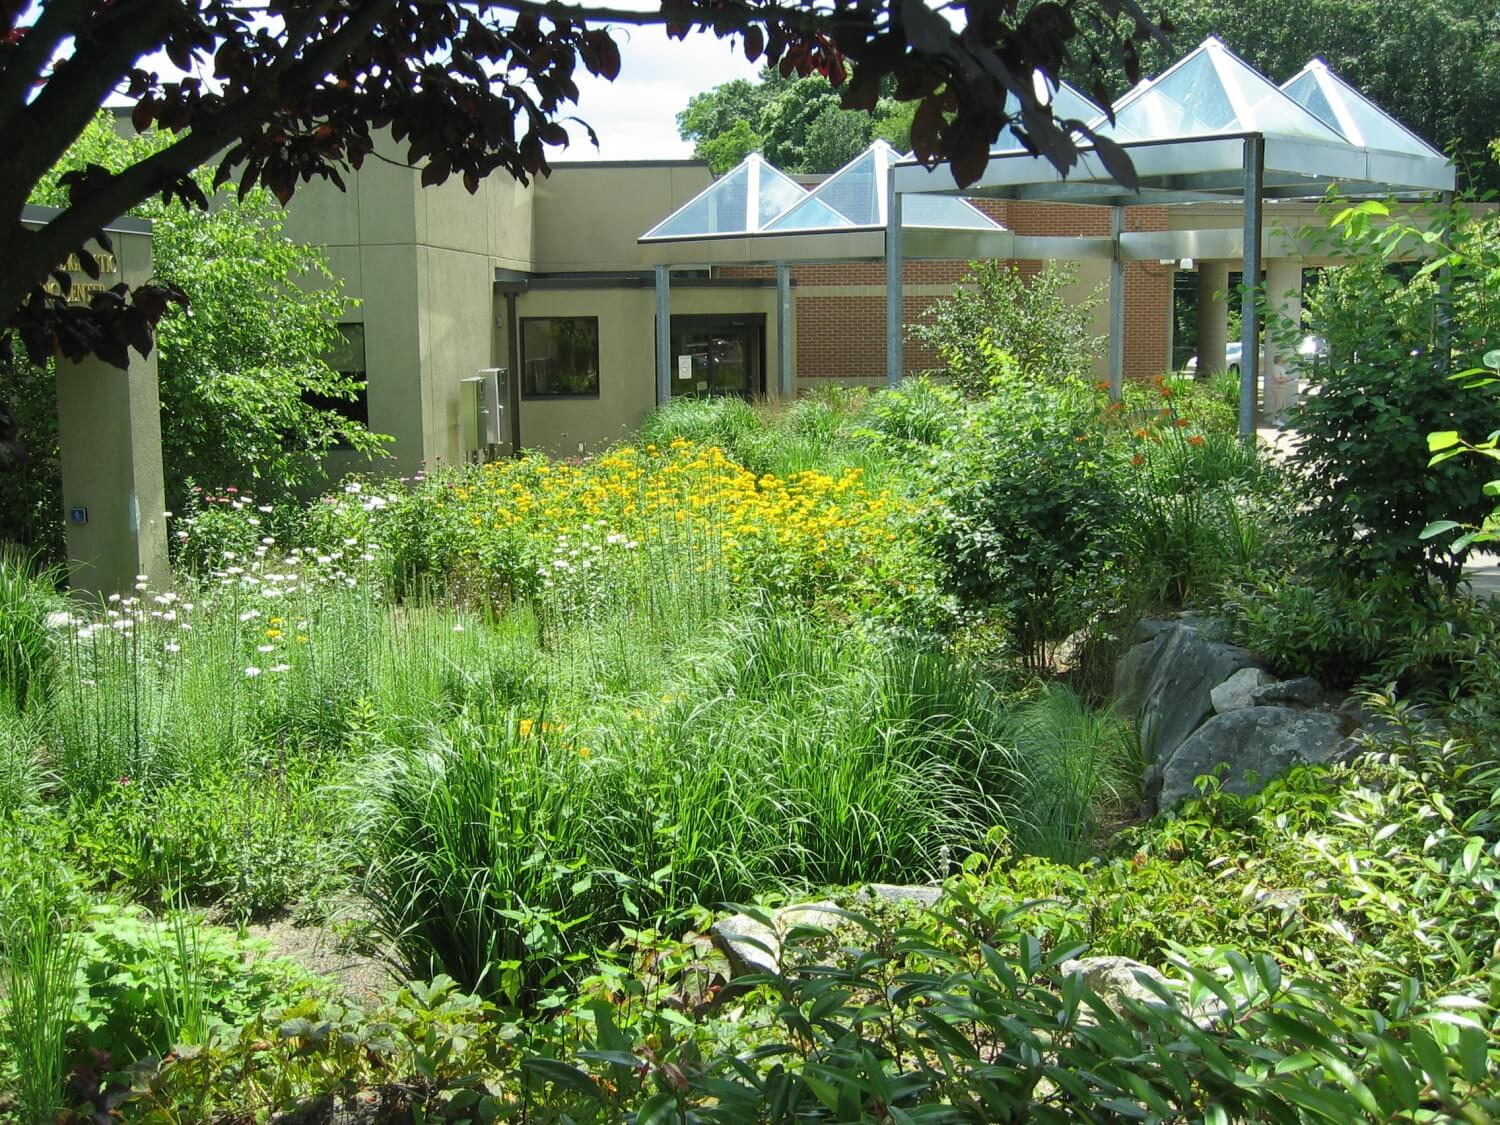 Kent Hospital's Breast Health Center healing rain garden with native flowers, grasses, shrubs and trees.